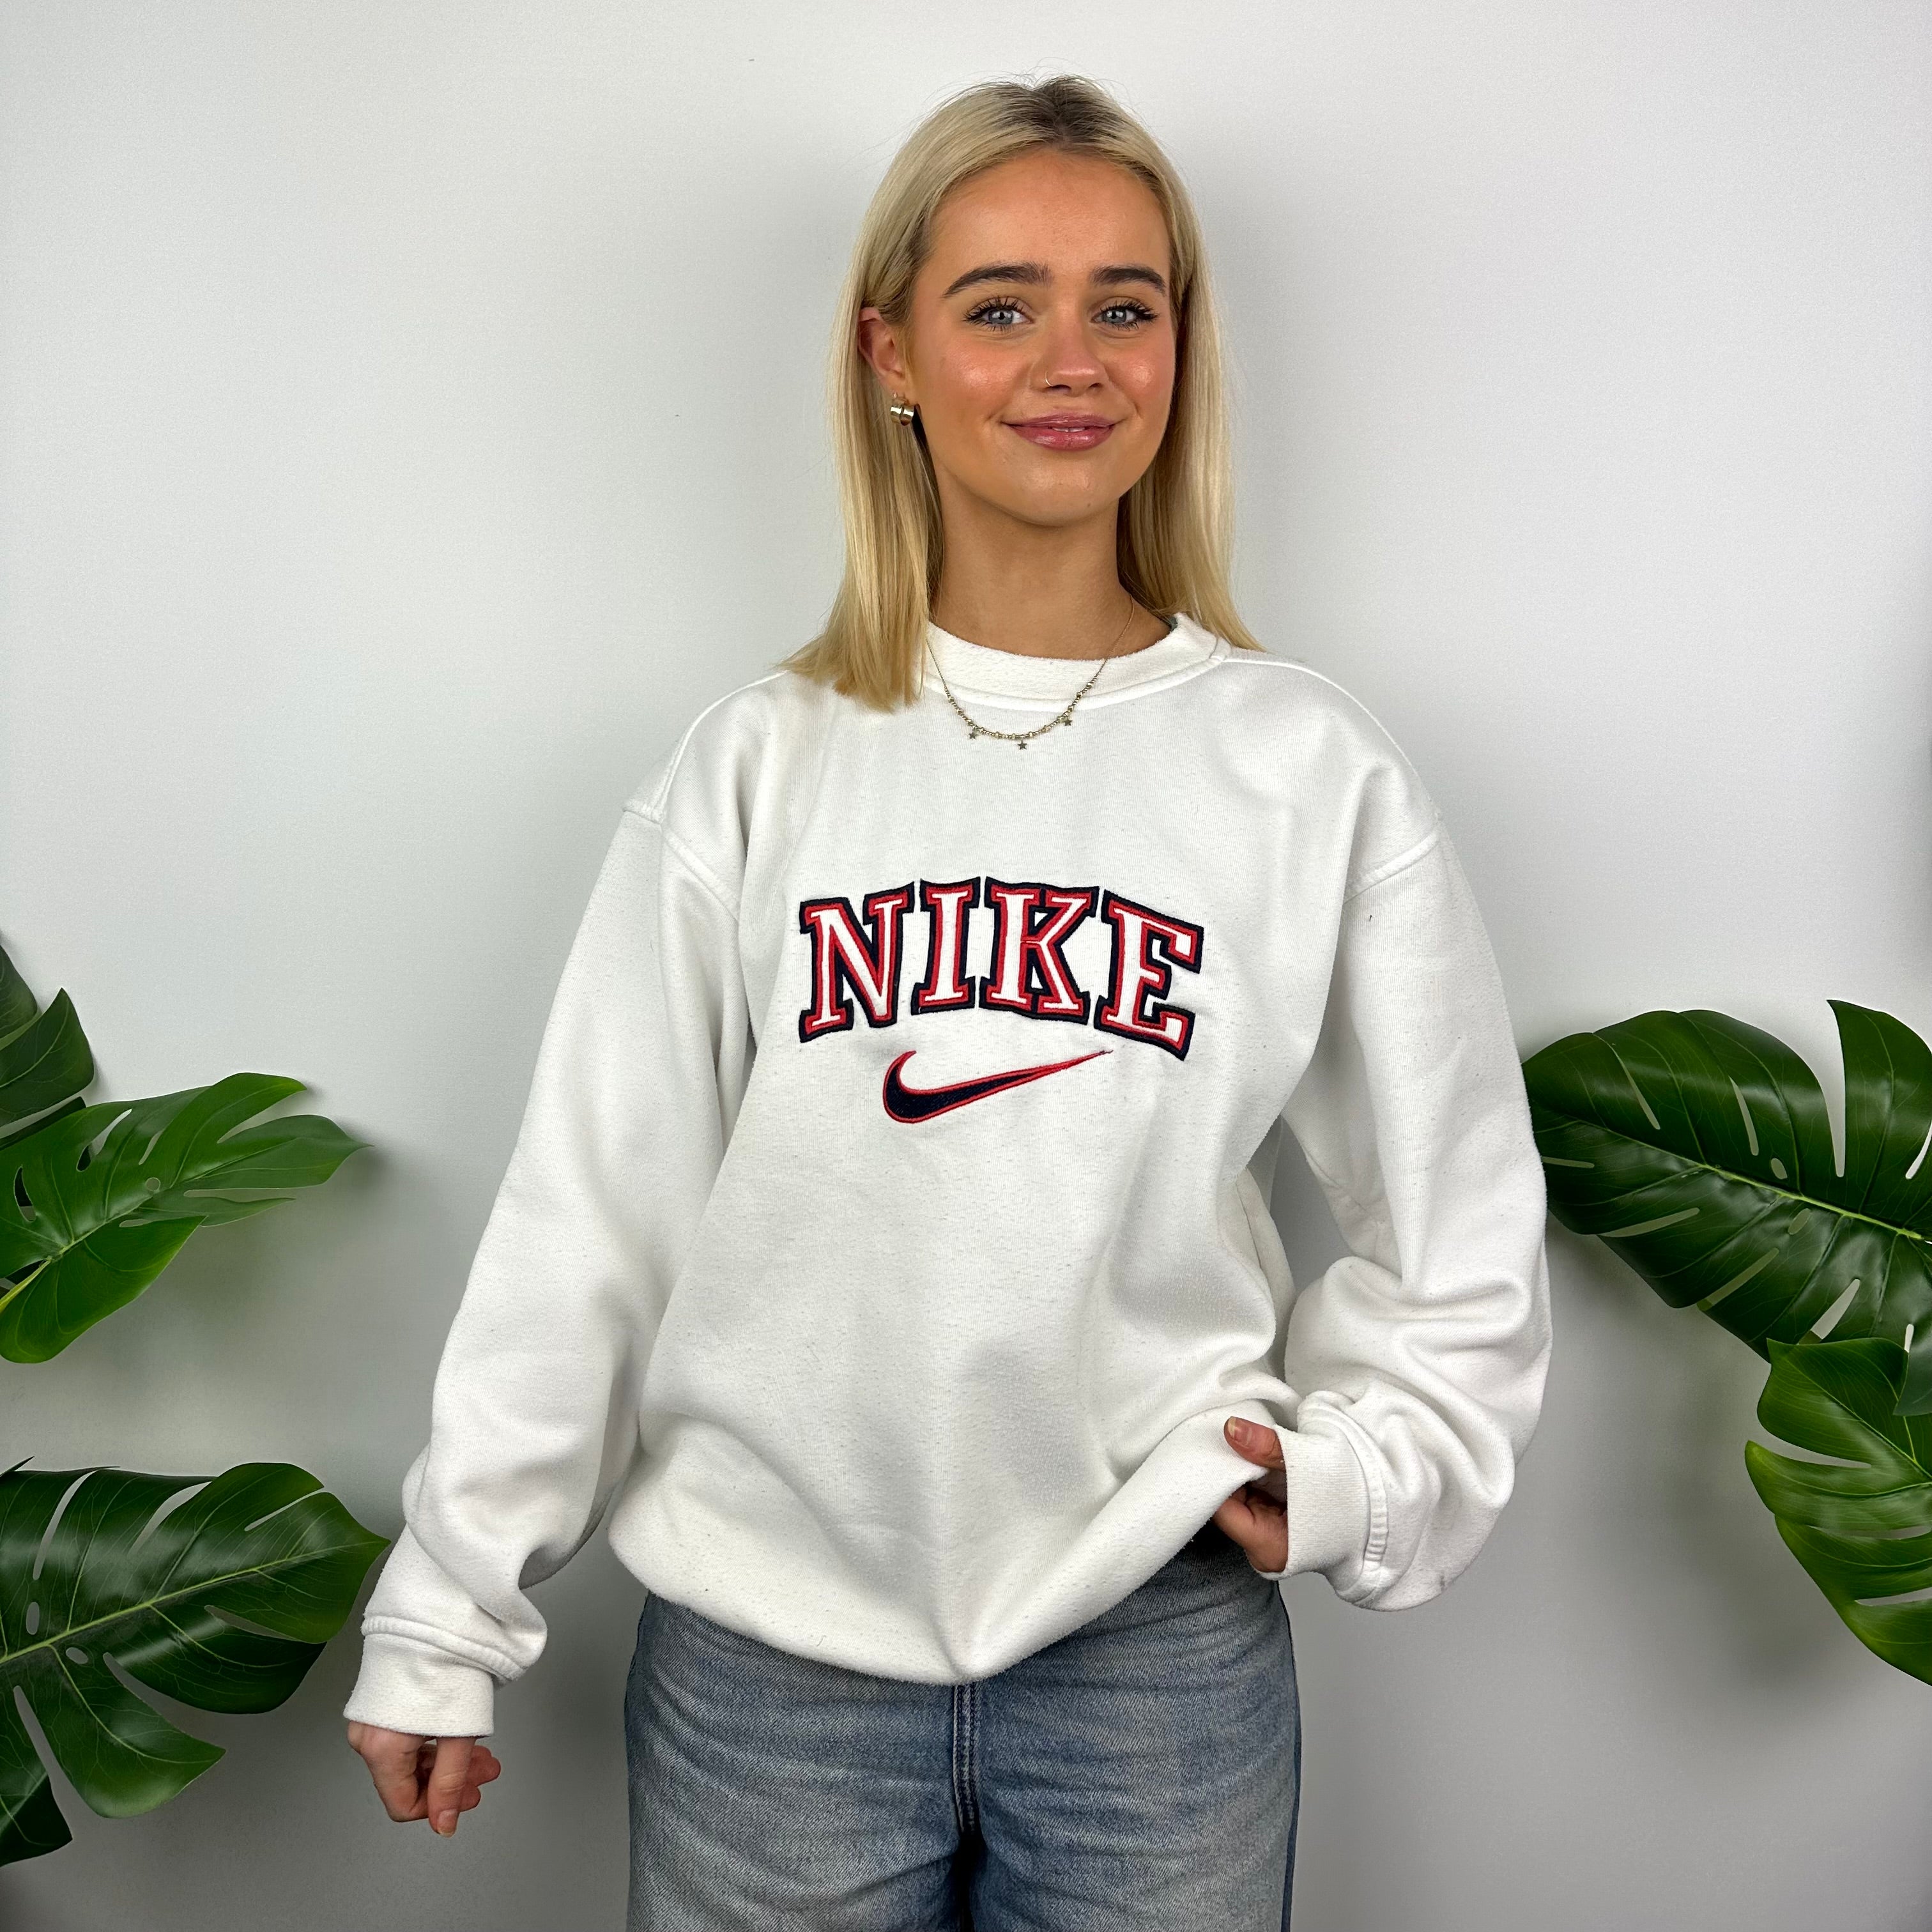 Nike White Embroidered Spell Out Sweatshirt (L)